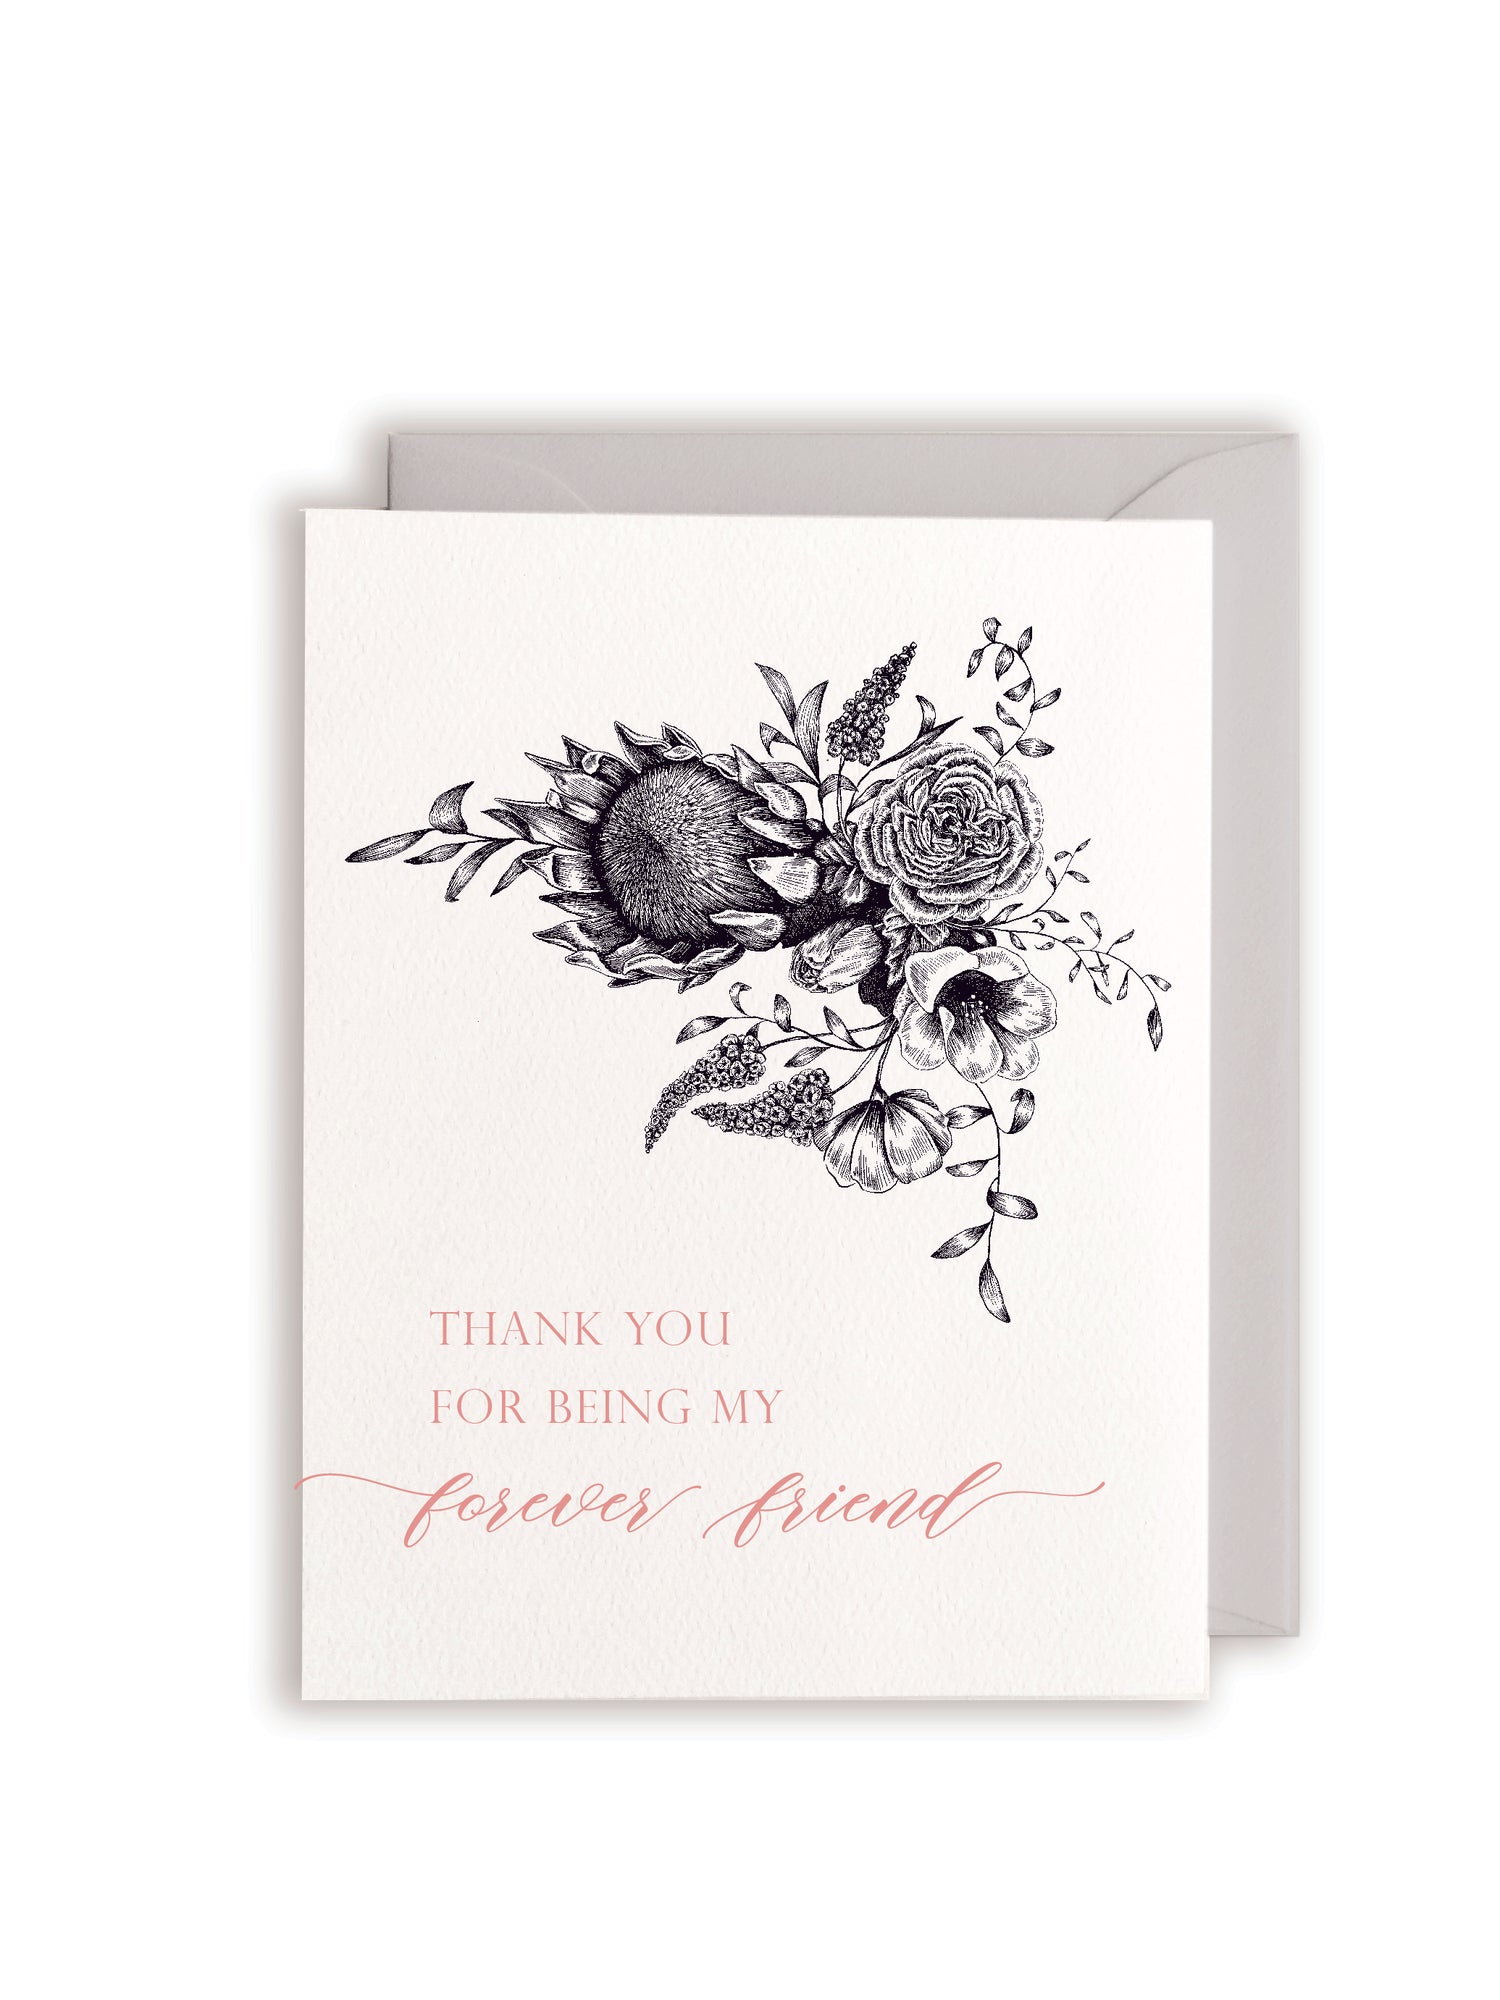 Letterpress friendship card with florals that says "thank you for being my forever friend" by Rust Belt Love